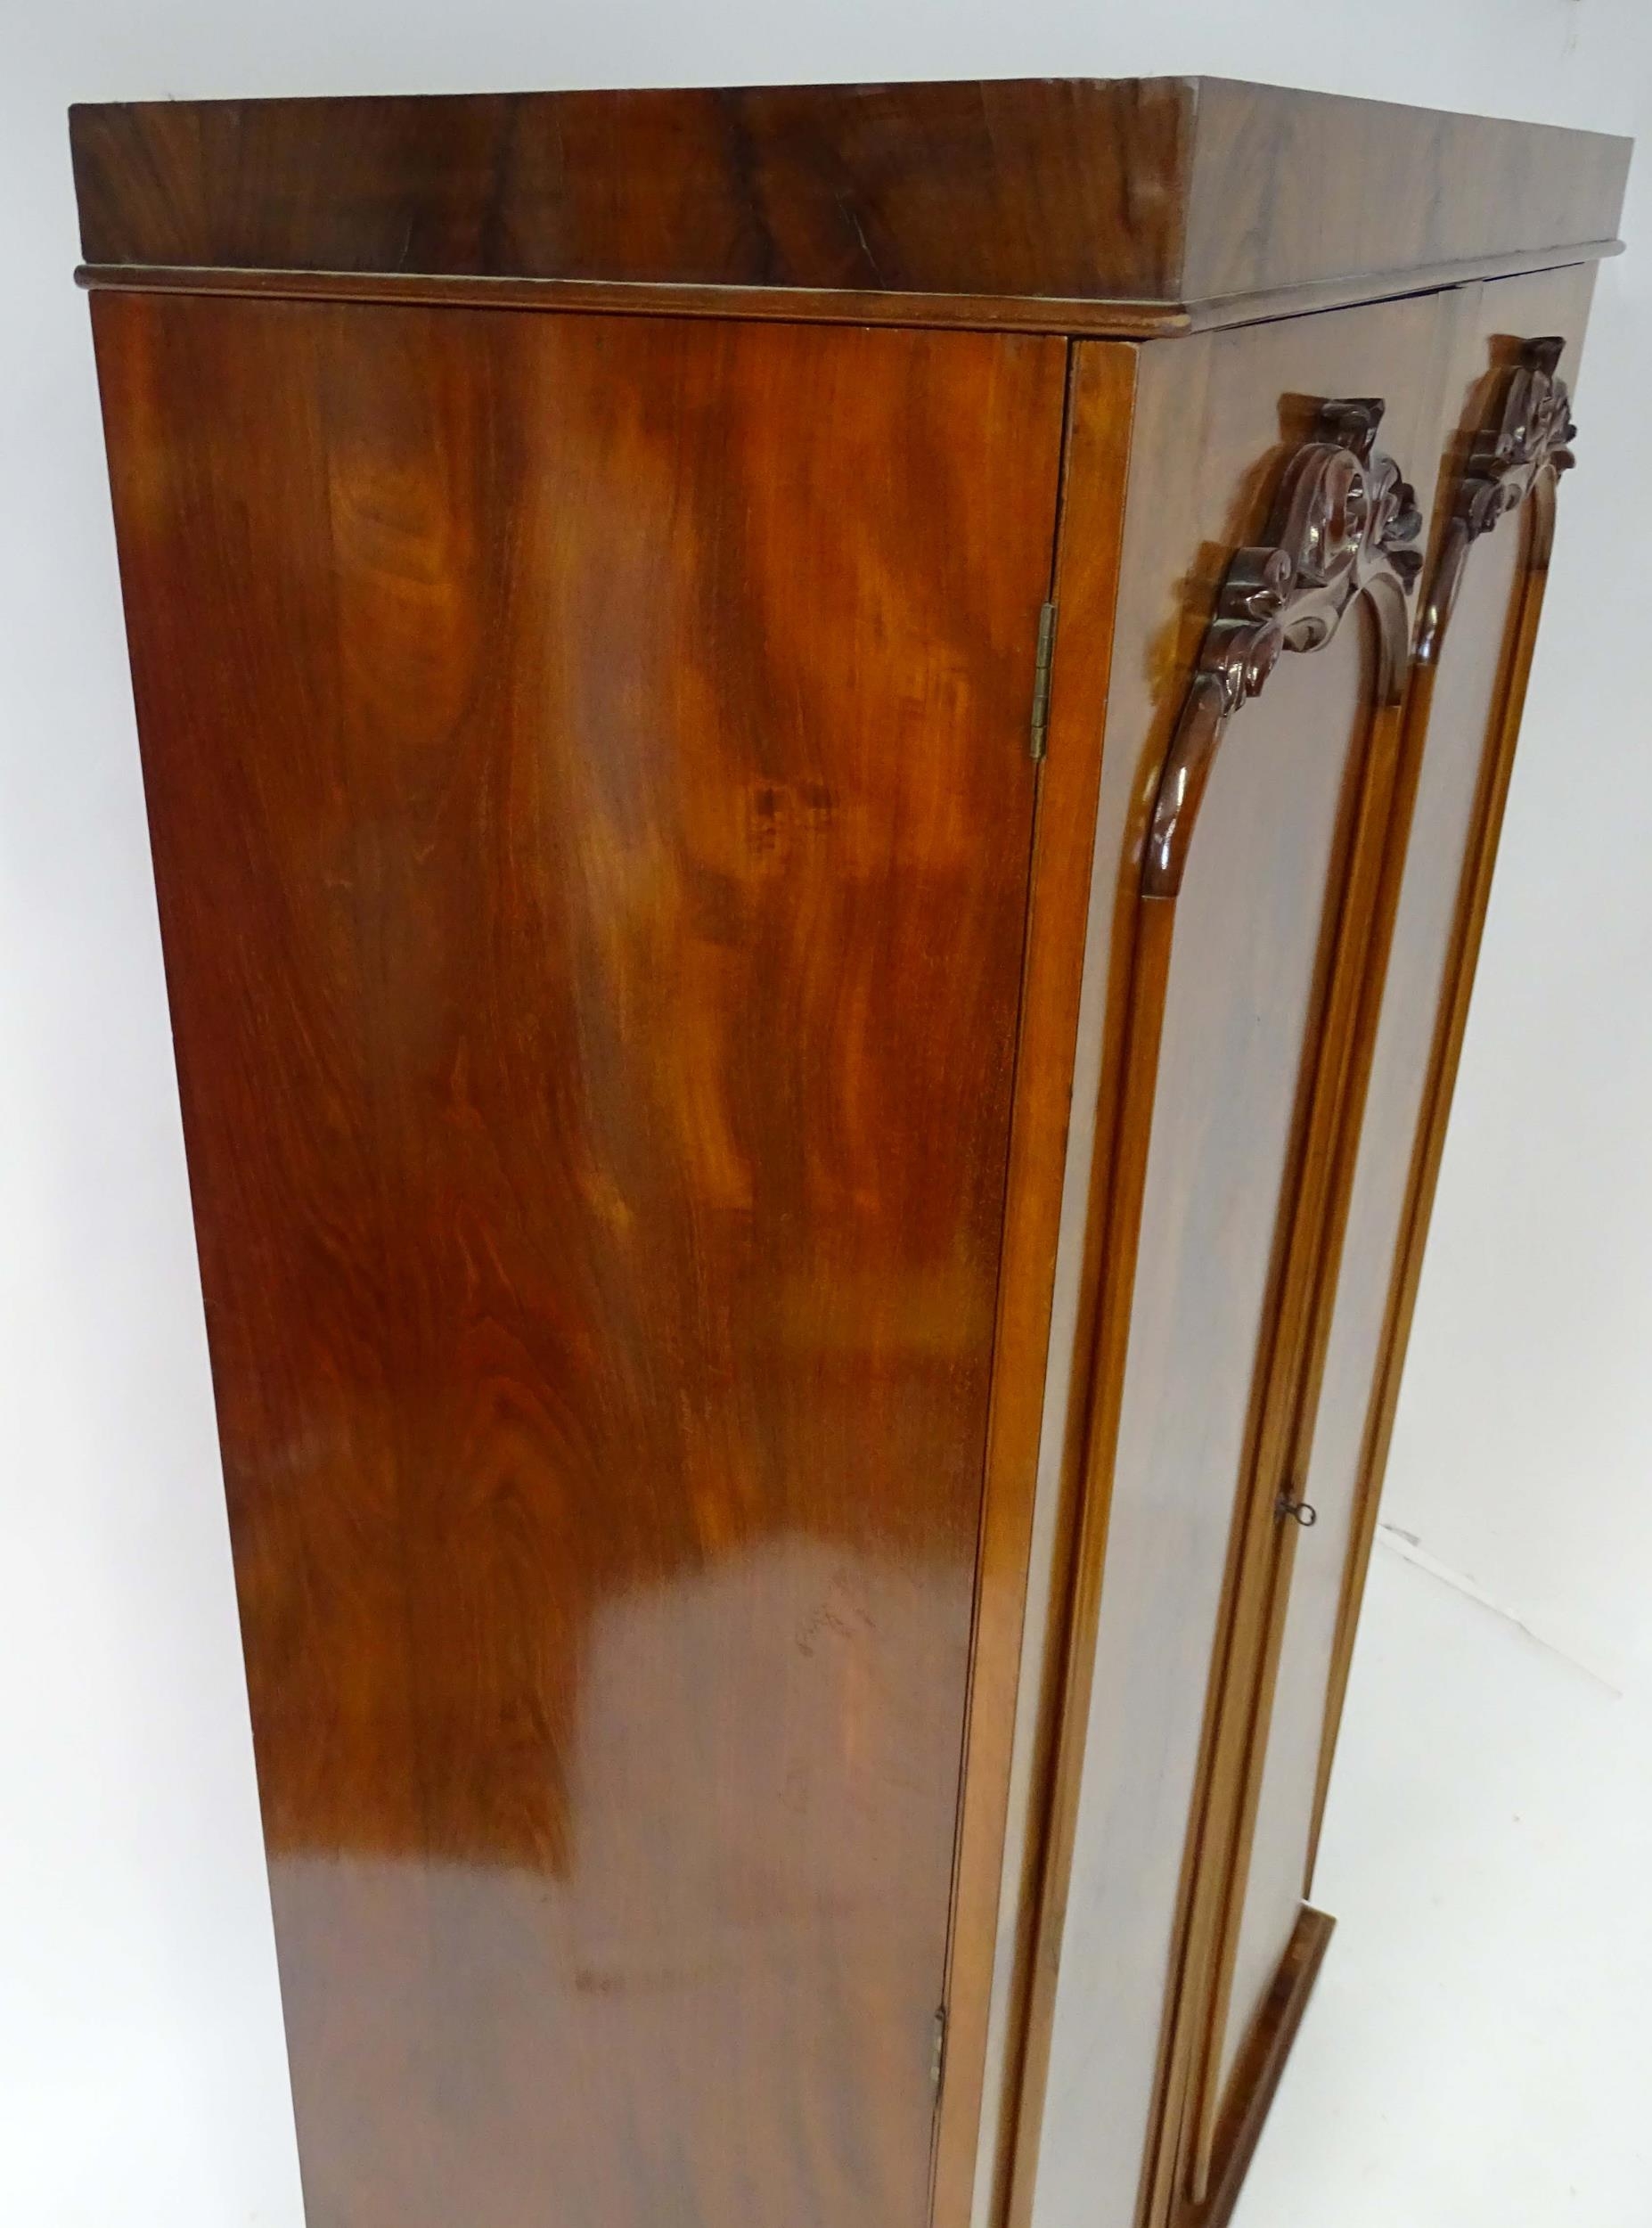 A mid 19thC mahogany double wardrobe with two panelled doors adorned with carved foliage and opening - Image 7 of 9